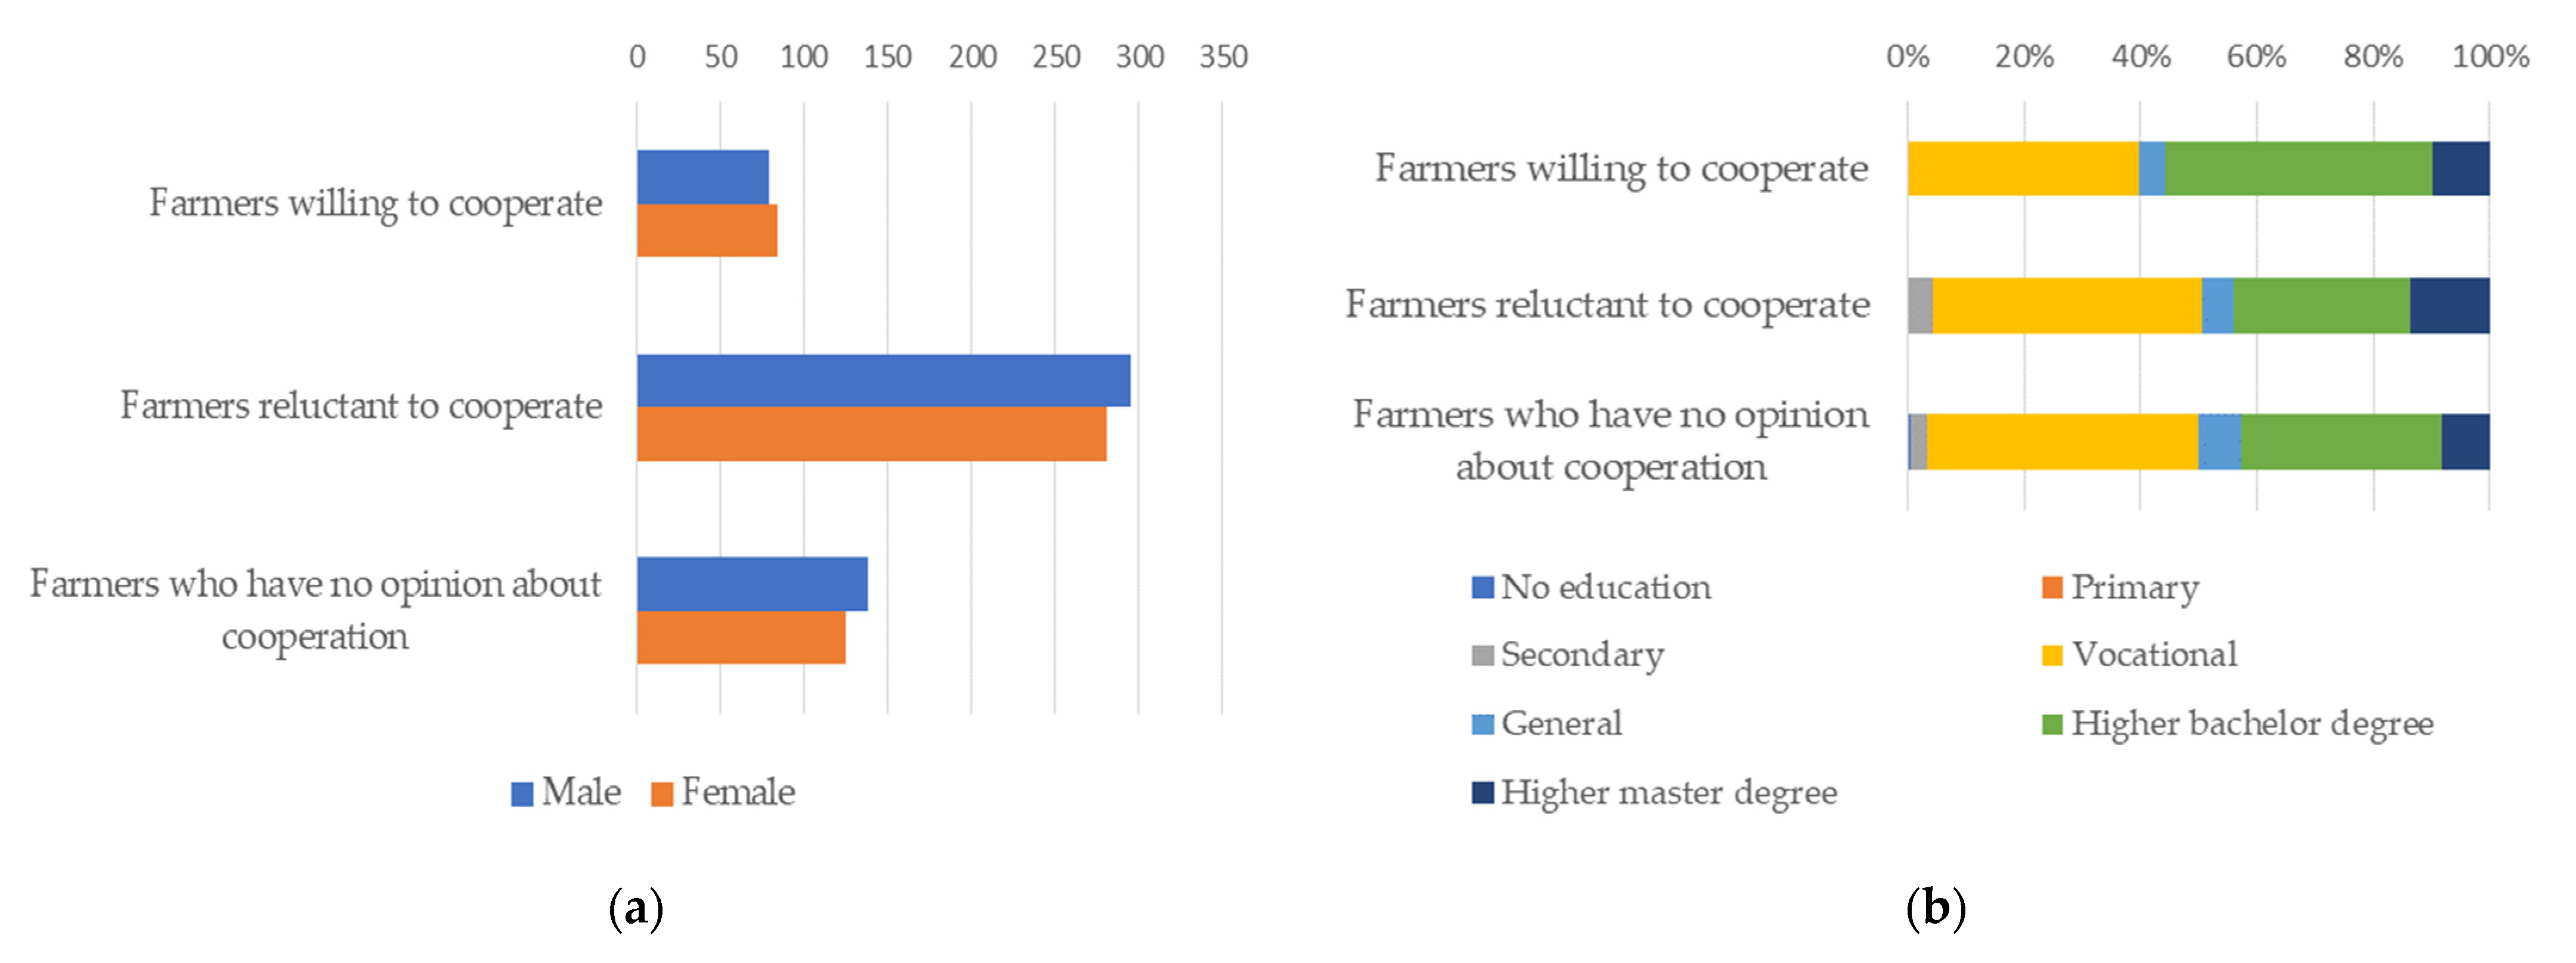 Agriculture | Free Full-Text | Profile of the Small-Scale Farms Willing to  Cooperate—Evidence from Lithuania | HTML